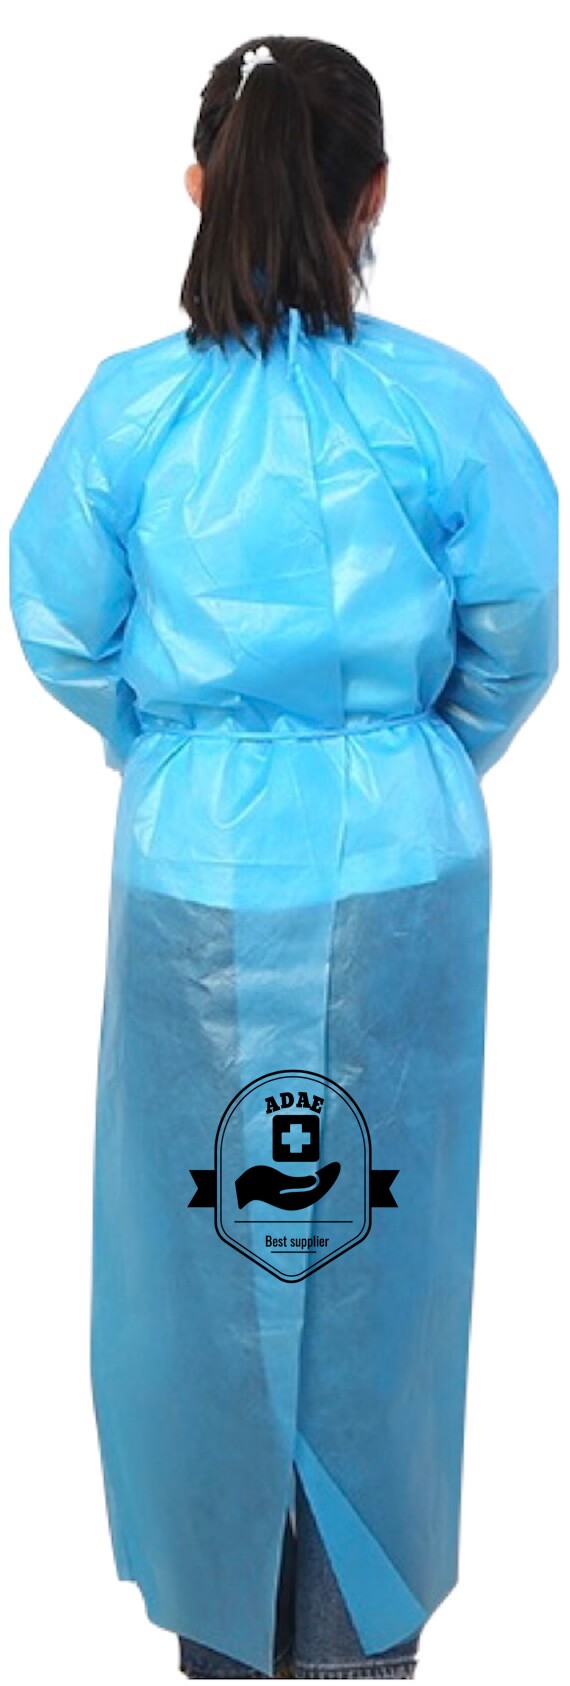 ADAE SMS surgical Gown